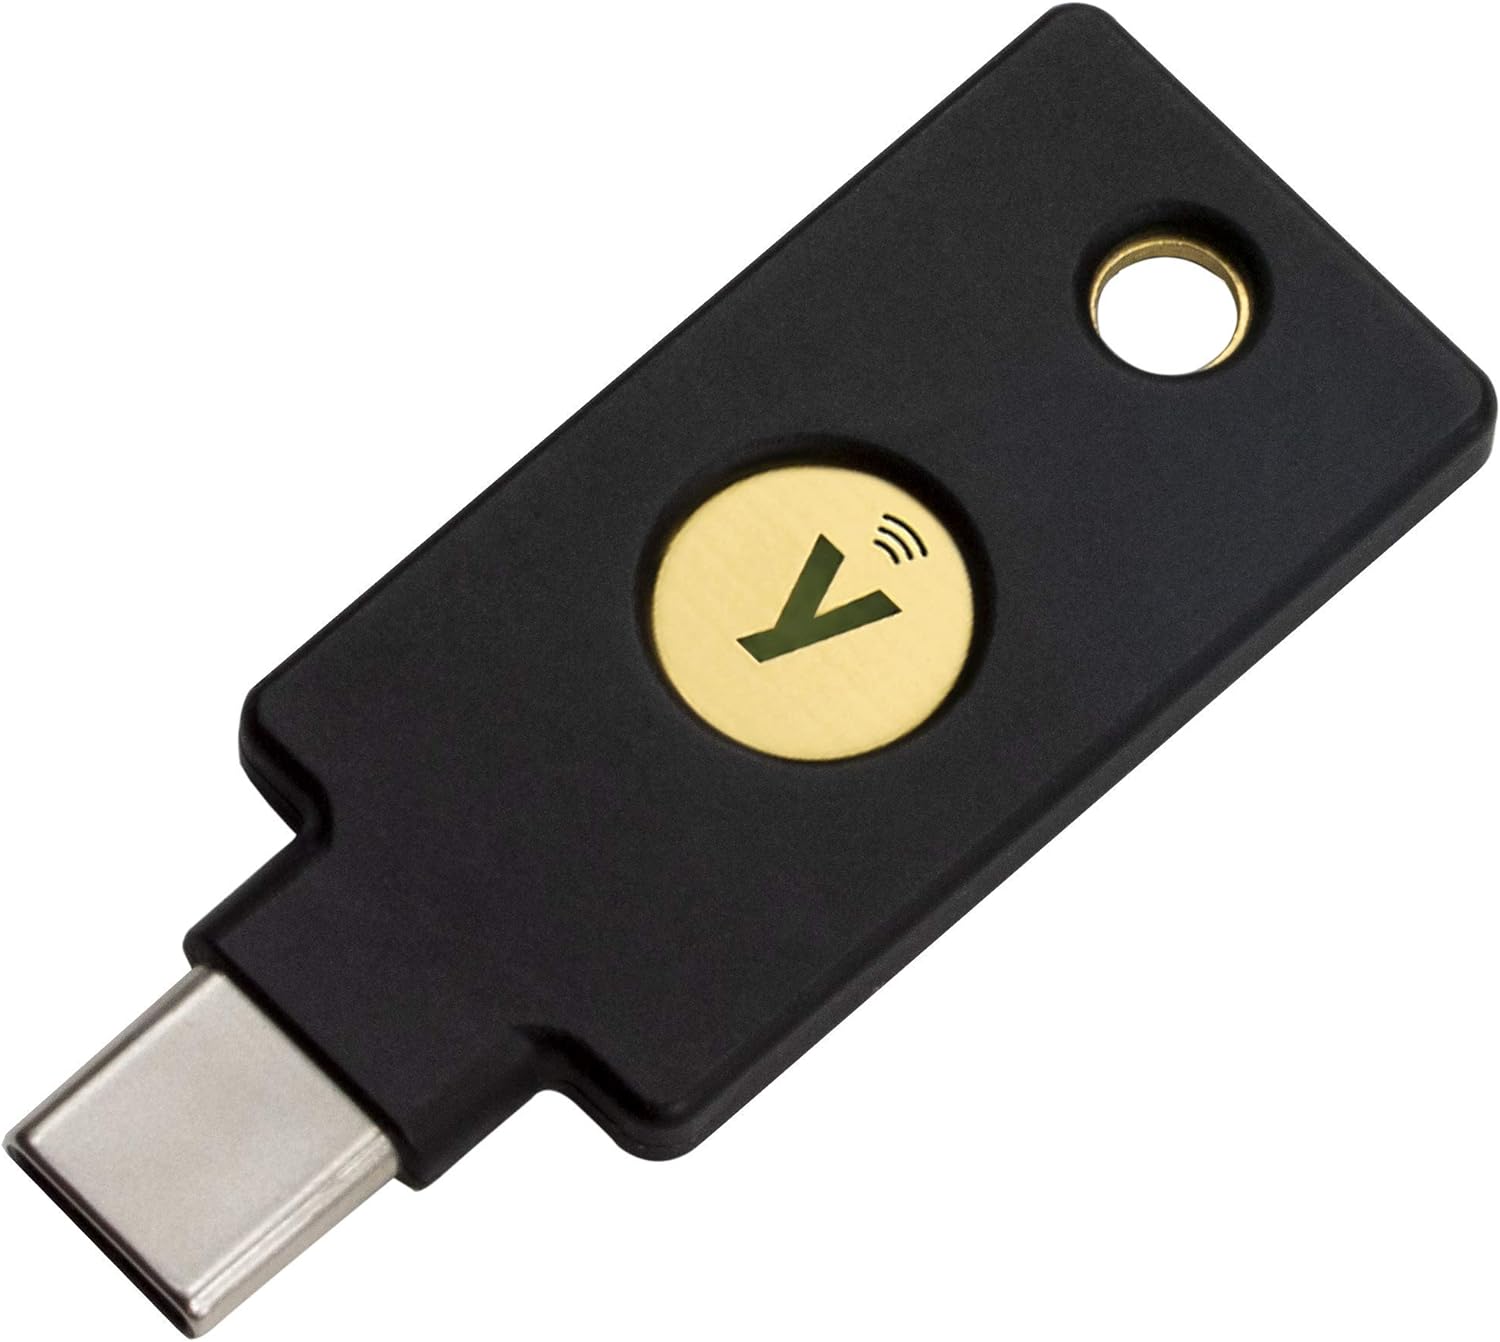 Security Key – Enhance Online Security with the YubiKey 5C NFC